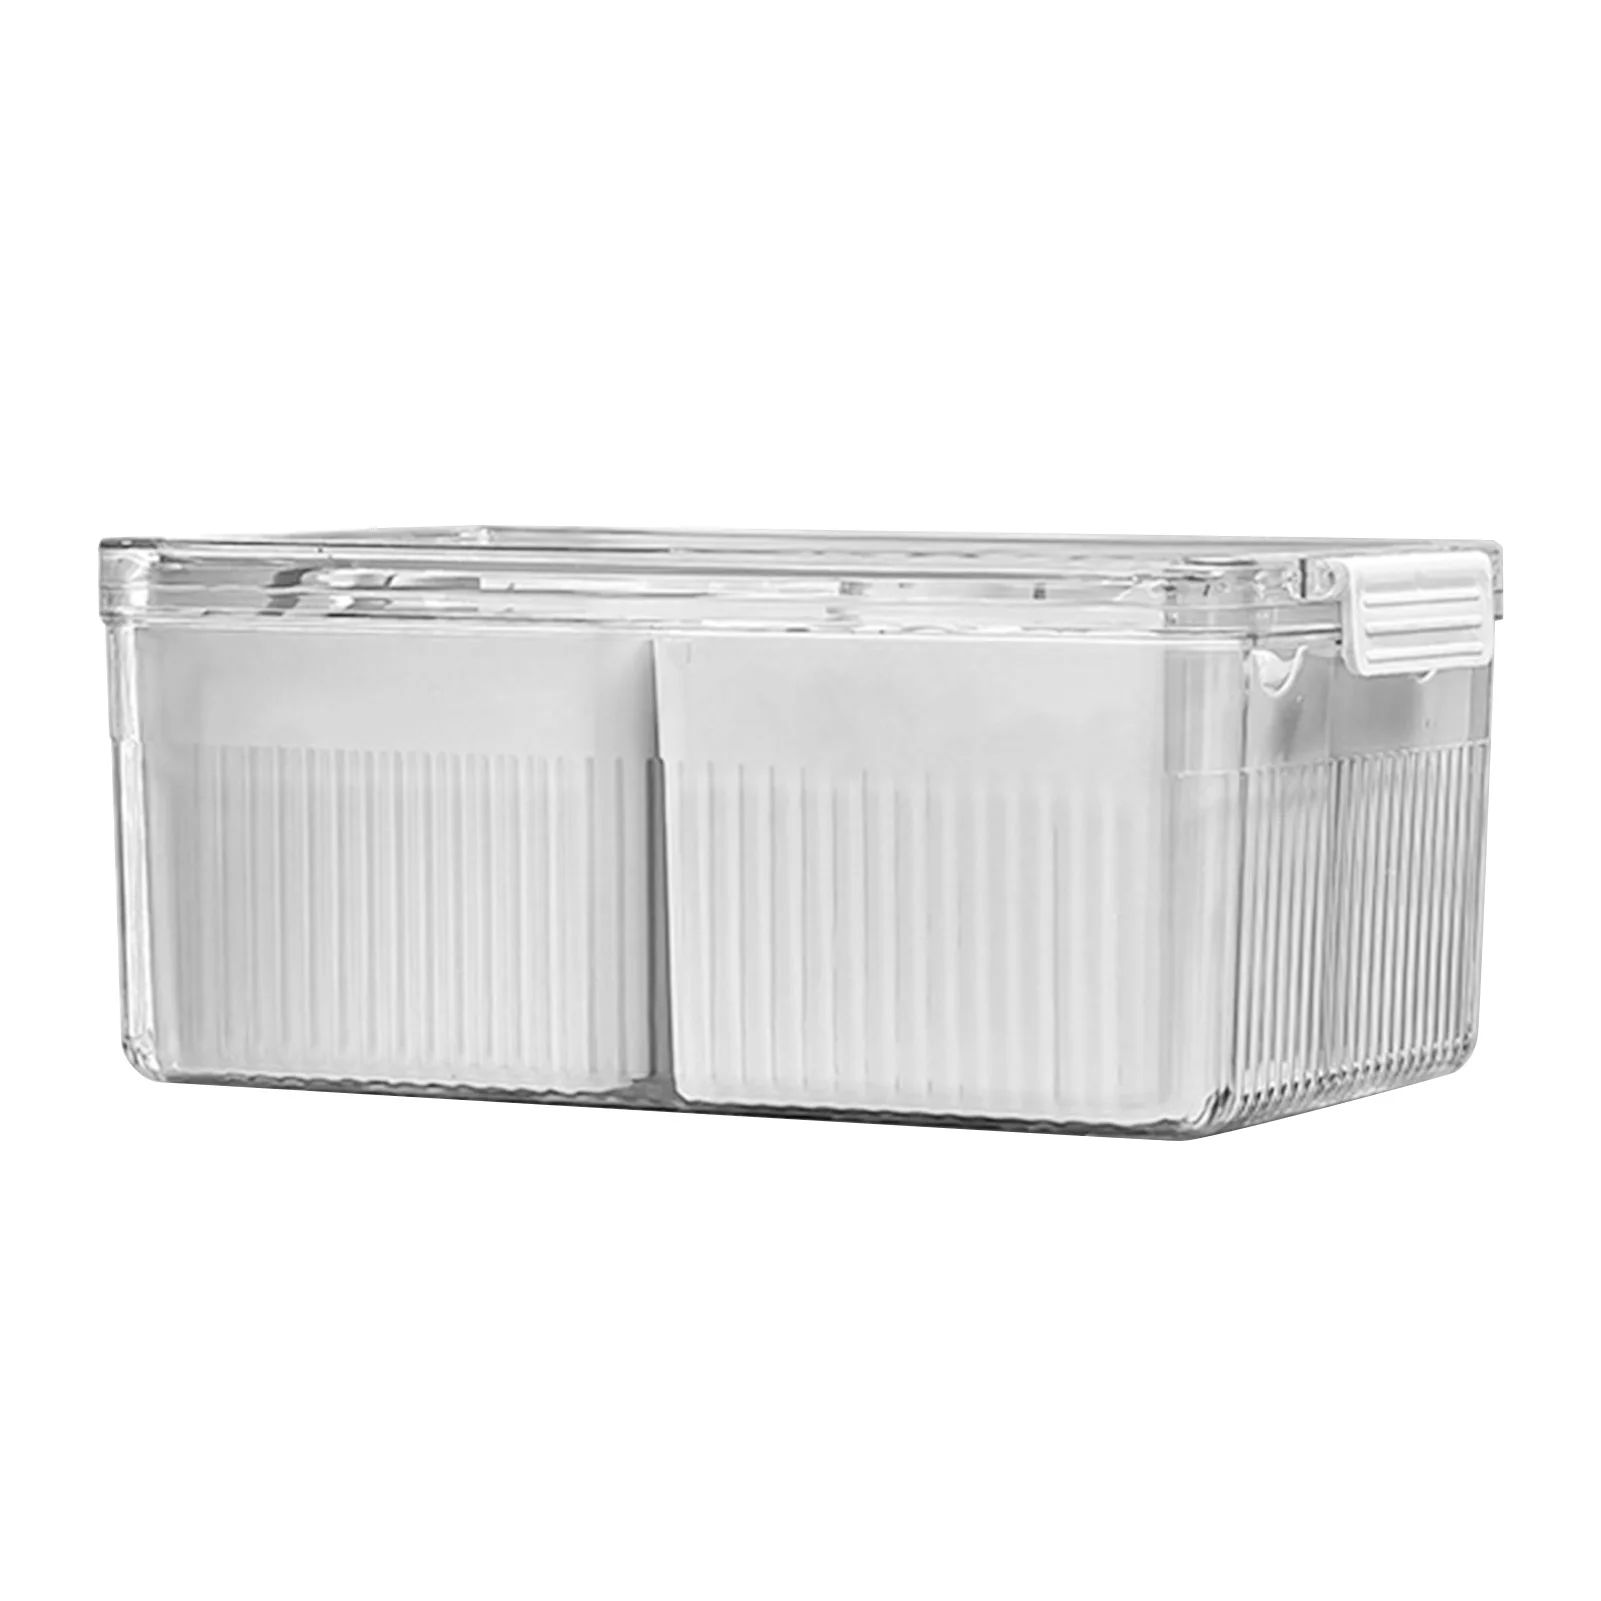 

Fridge Food Storage Box Veggie Salad Keeper With 4 Removable Boxes 4 Compartments Well-Sealing Removable Container With Timer